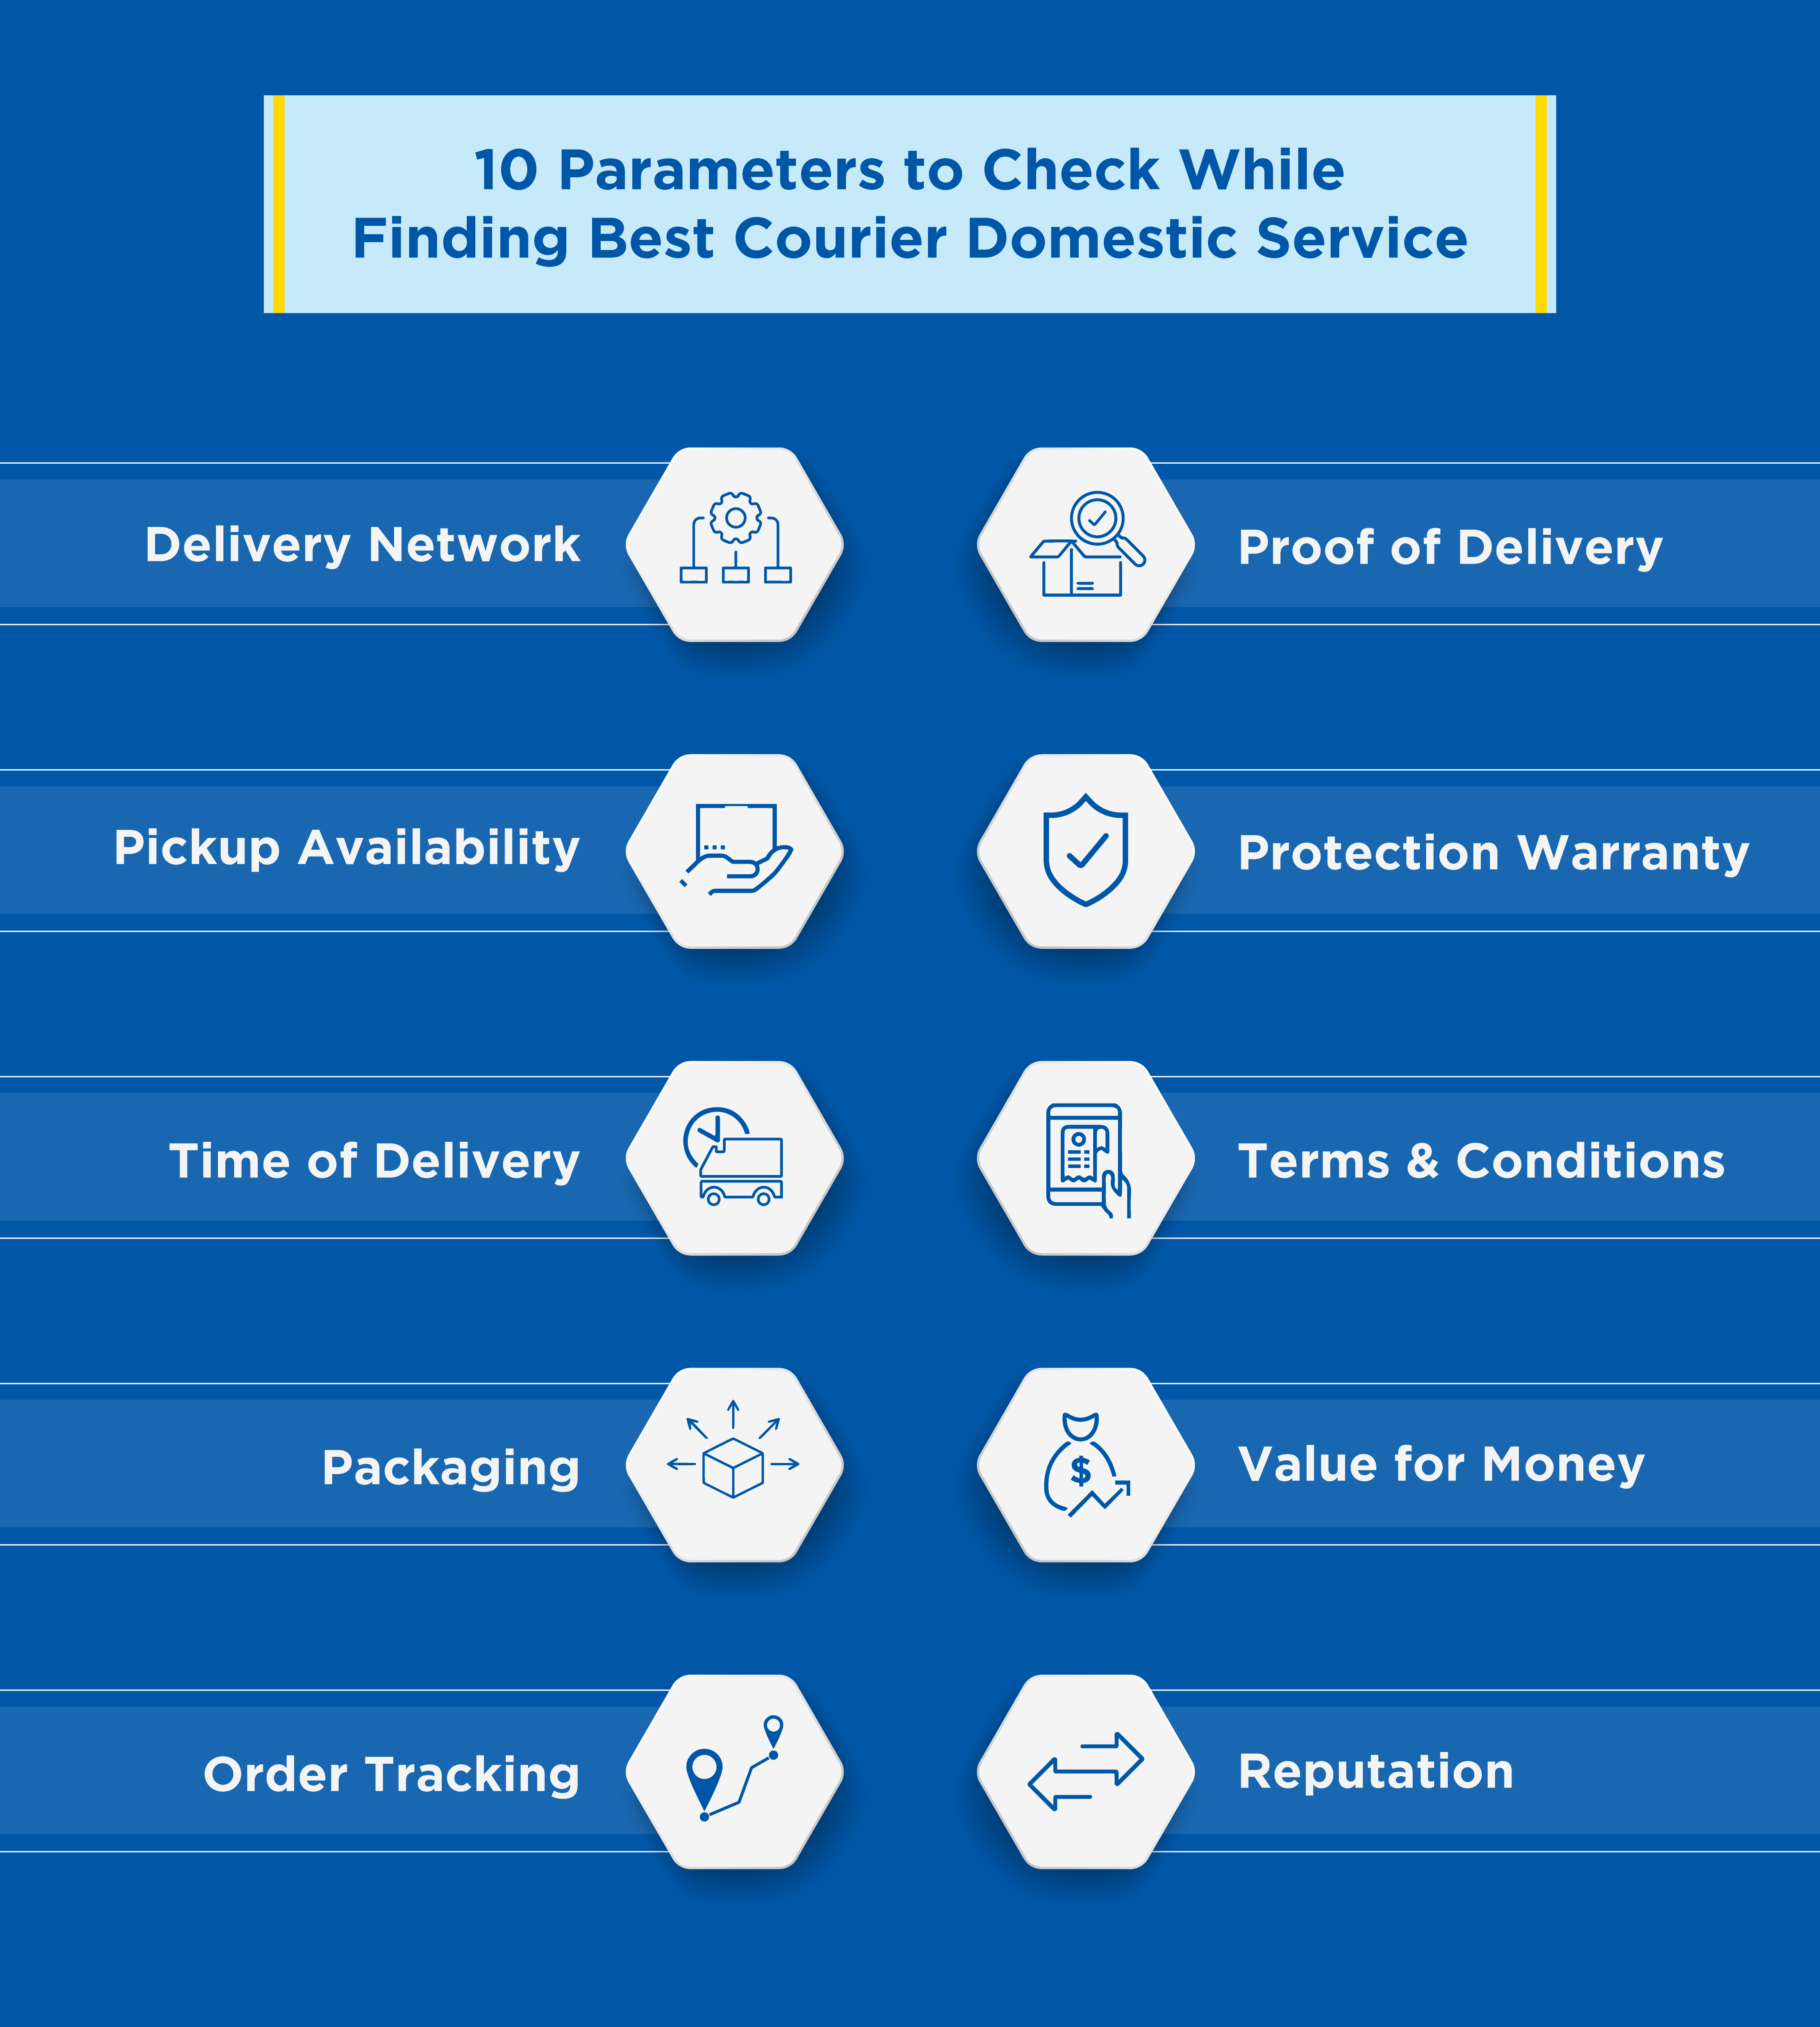 Parameters-to-check-while-finding-best-courier-domestic-service